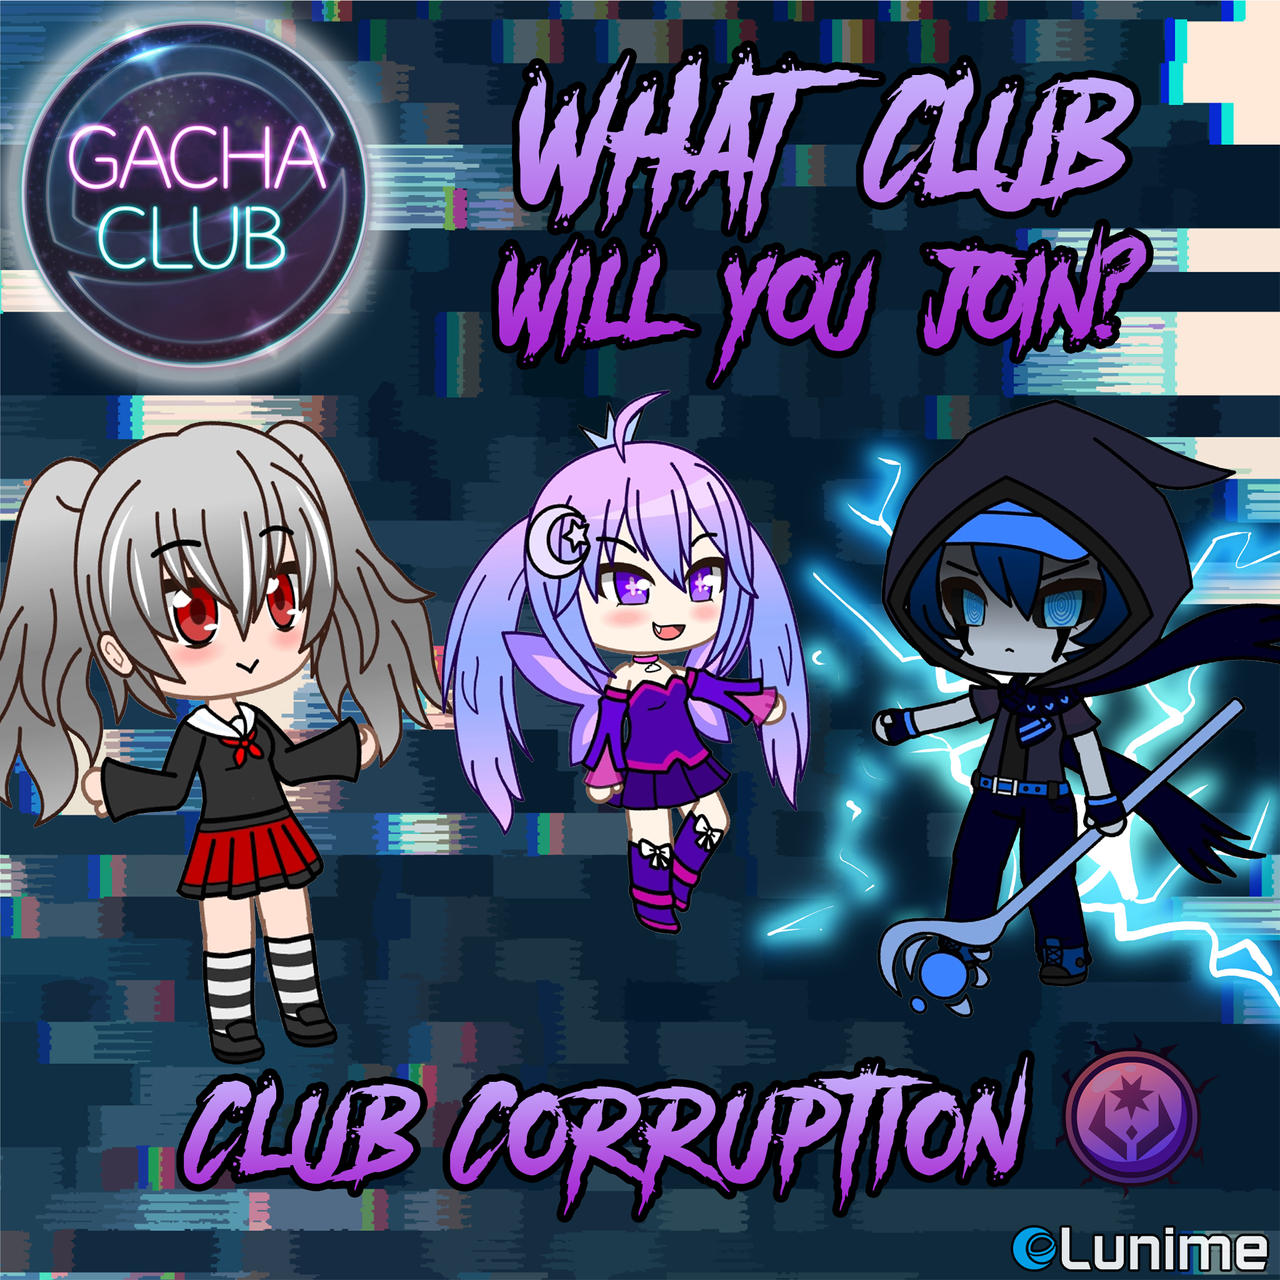 Made Gacha club OCs and I love them all, Cant wait for it to come to iOS!